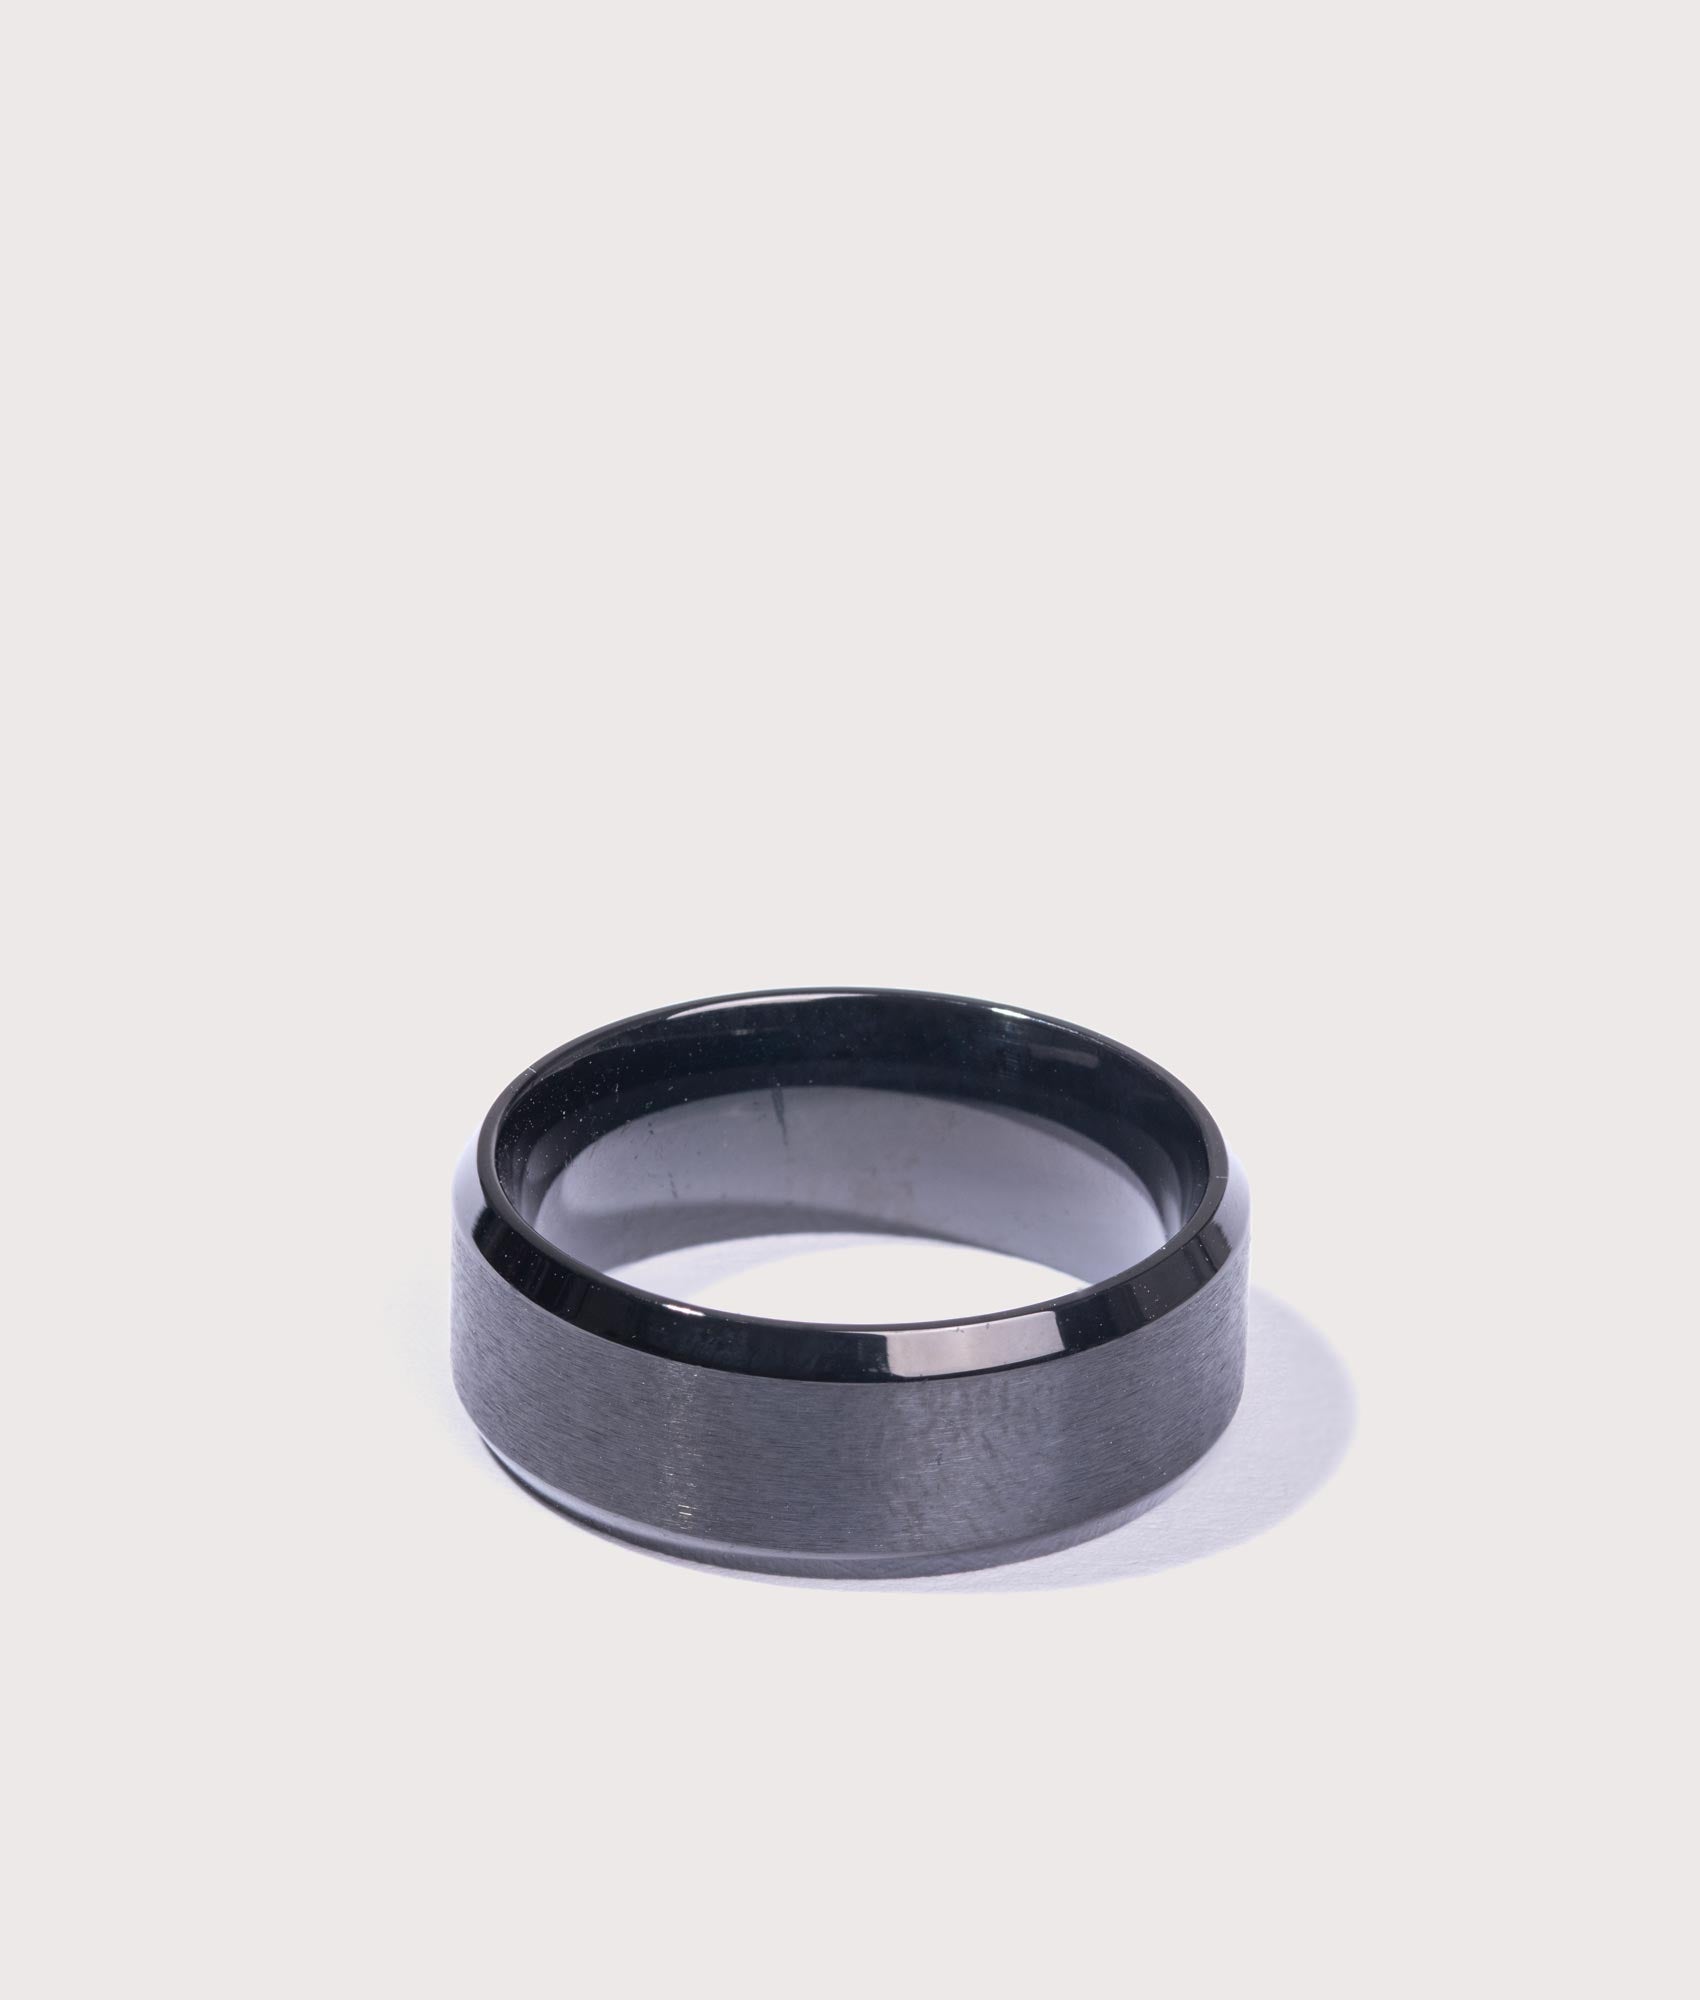 Mysterious Jeweller Mens Stainless Steel Band Ring - Colour: Black - Size: Q/8